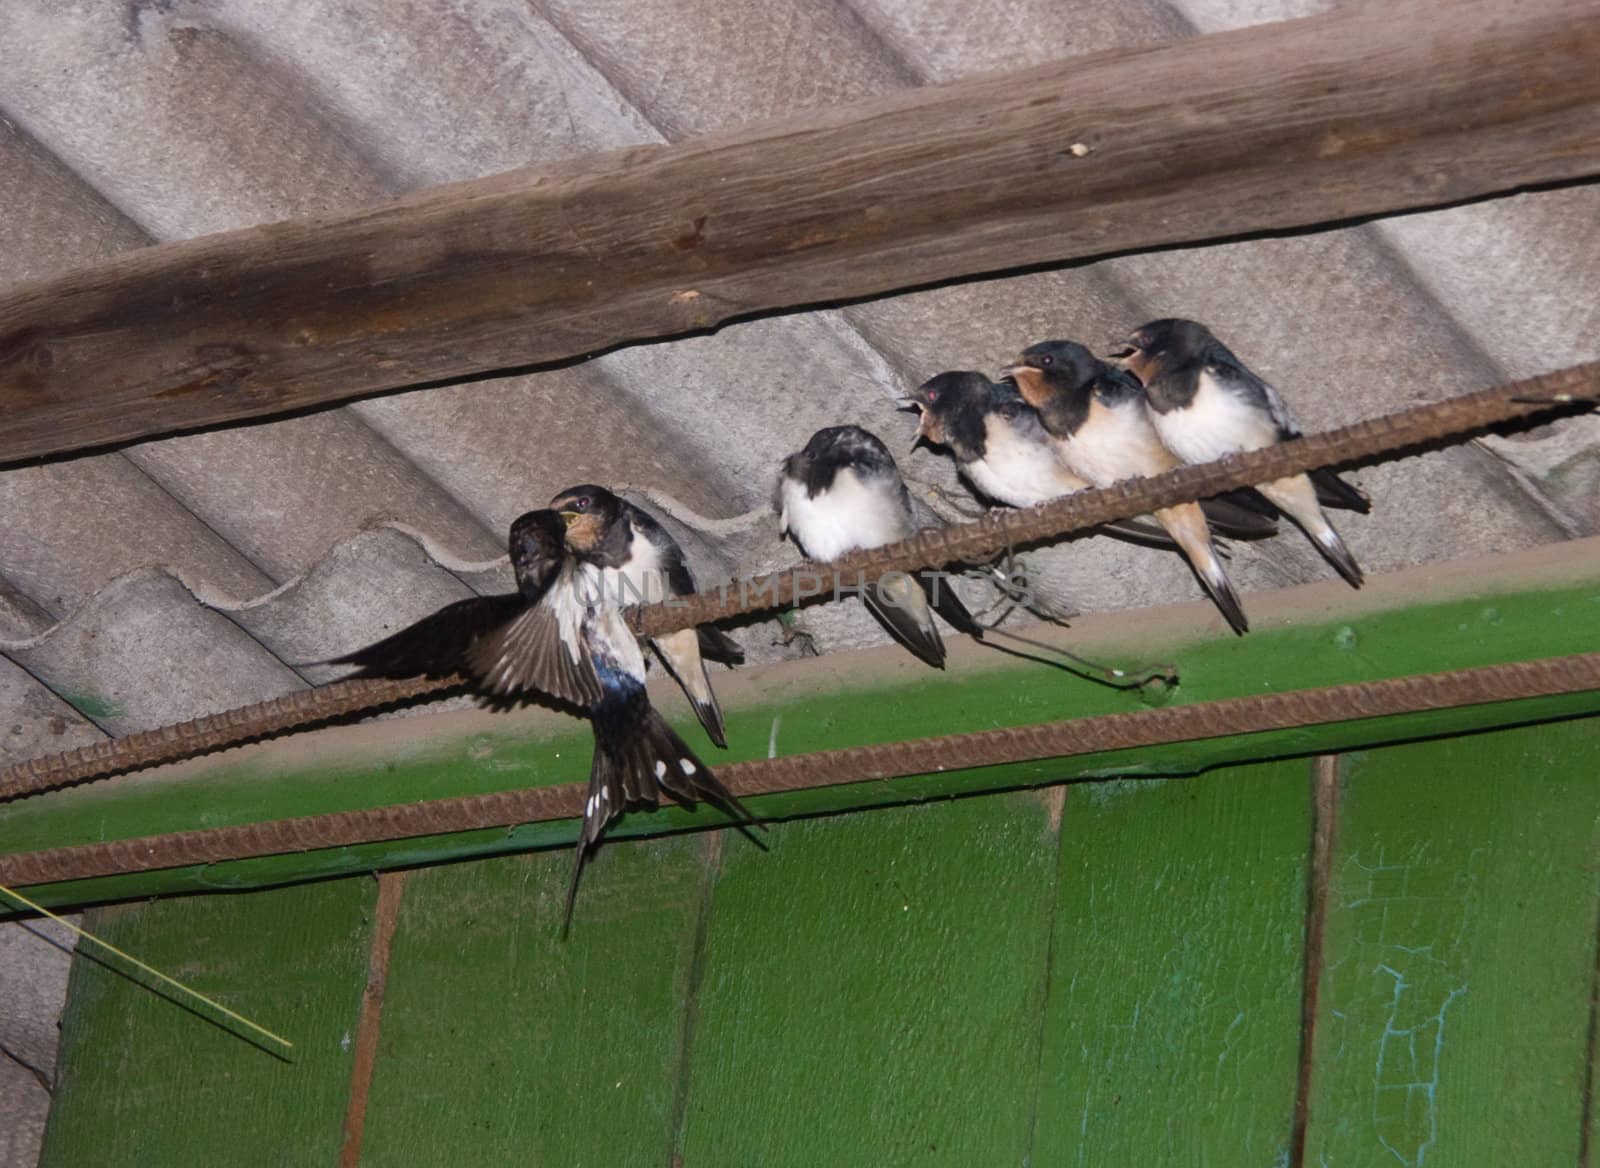 The swallow feeds the baby birds by soloir